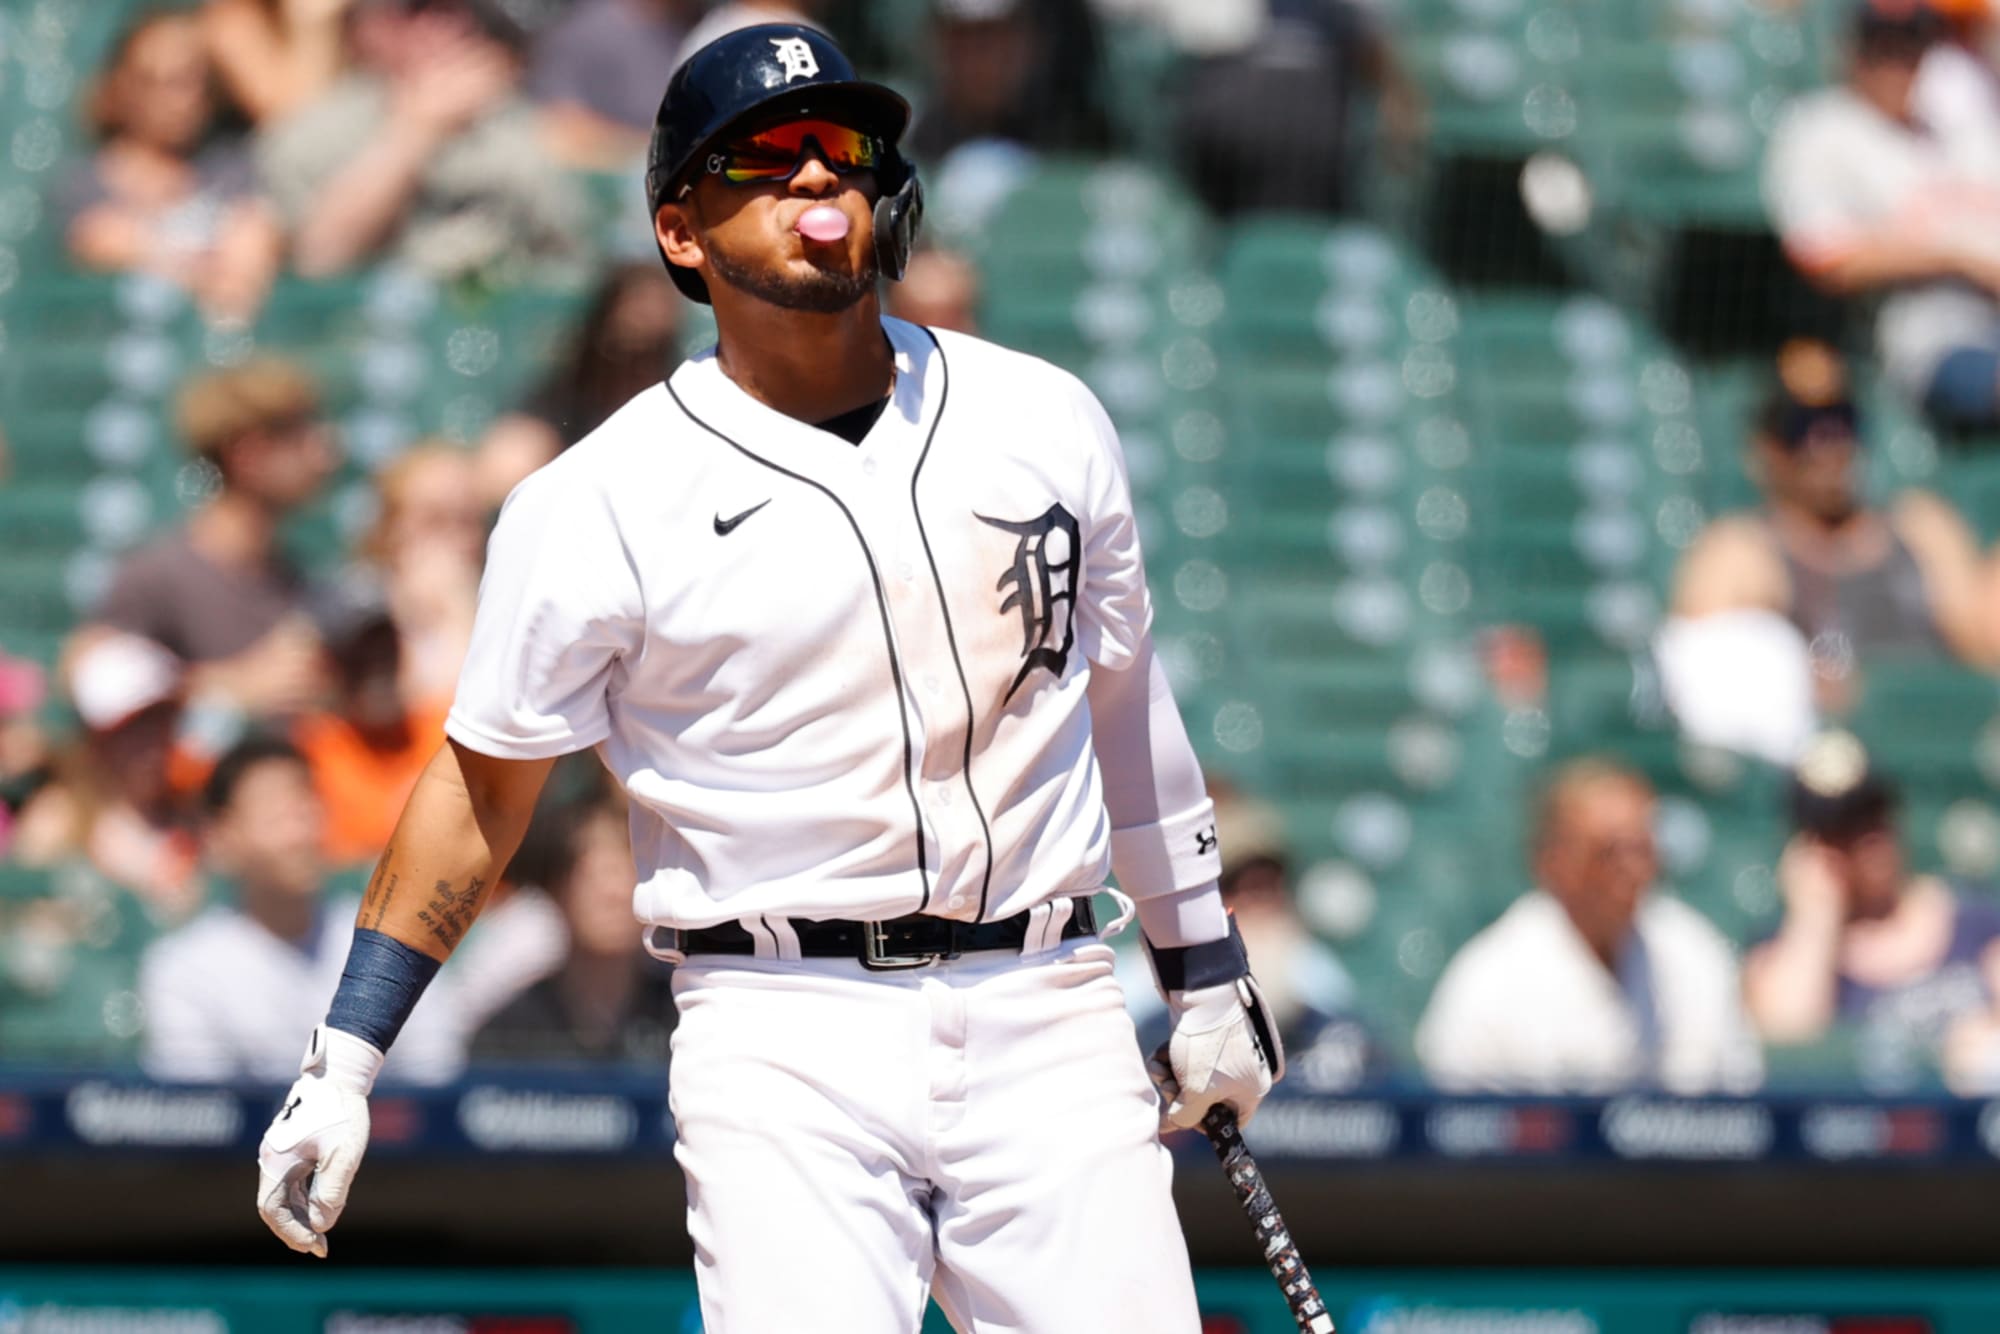 Tigers will activate 2 players from injured list on roster expansion day 